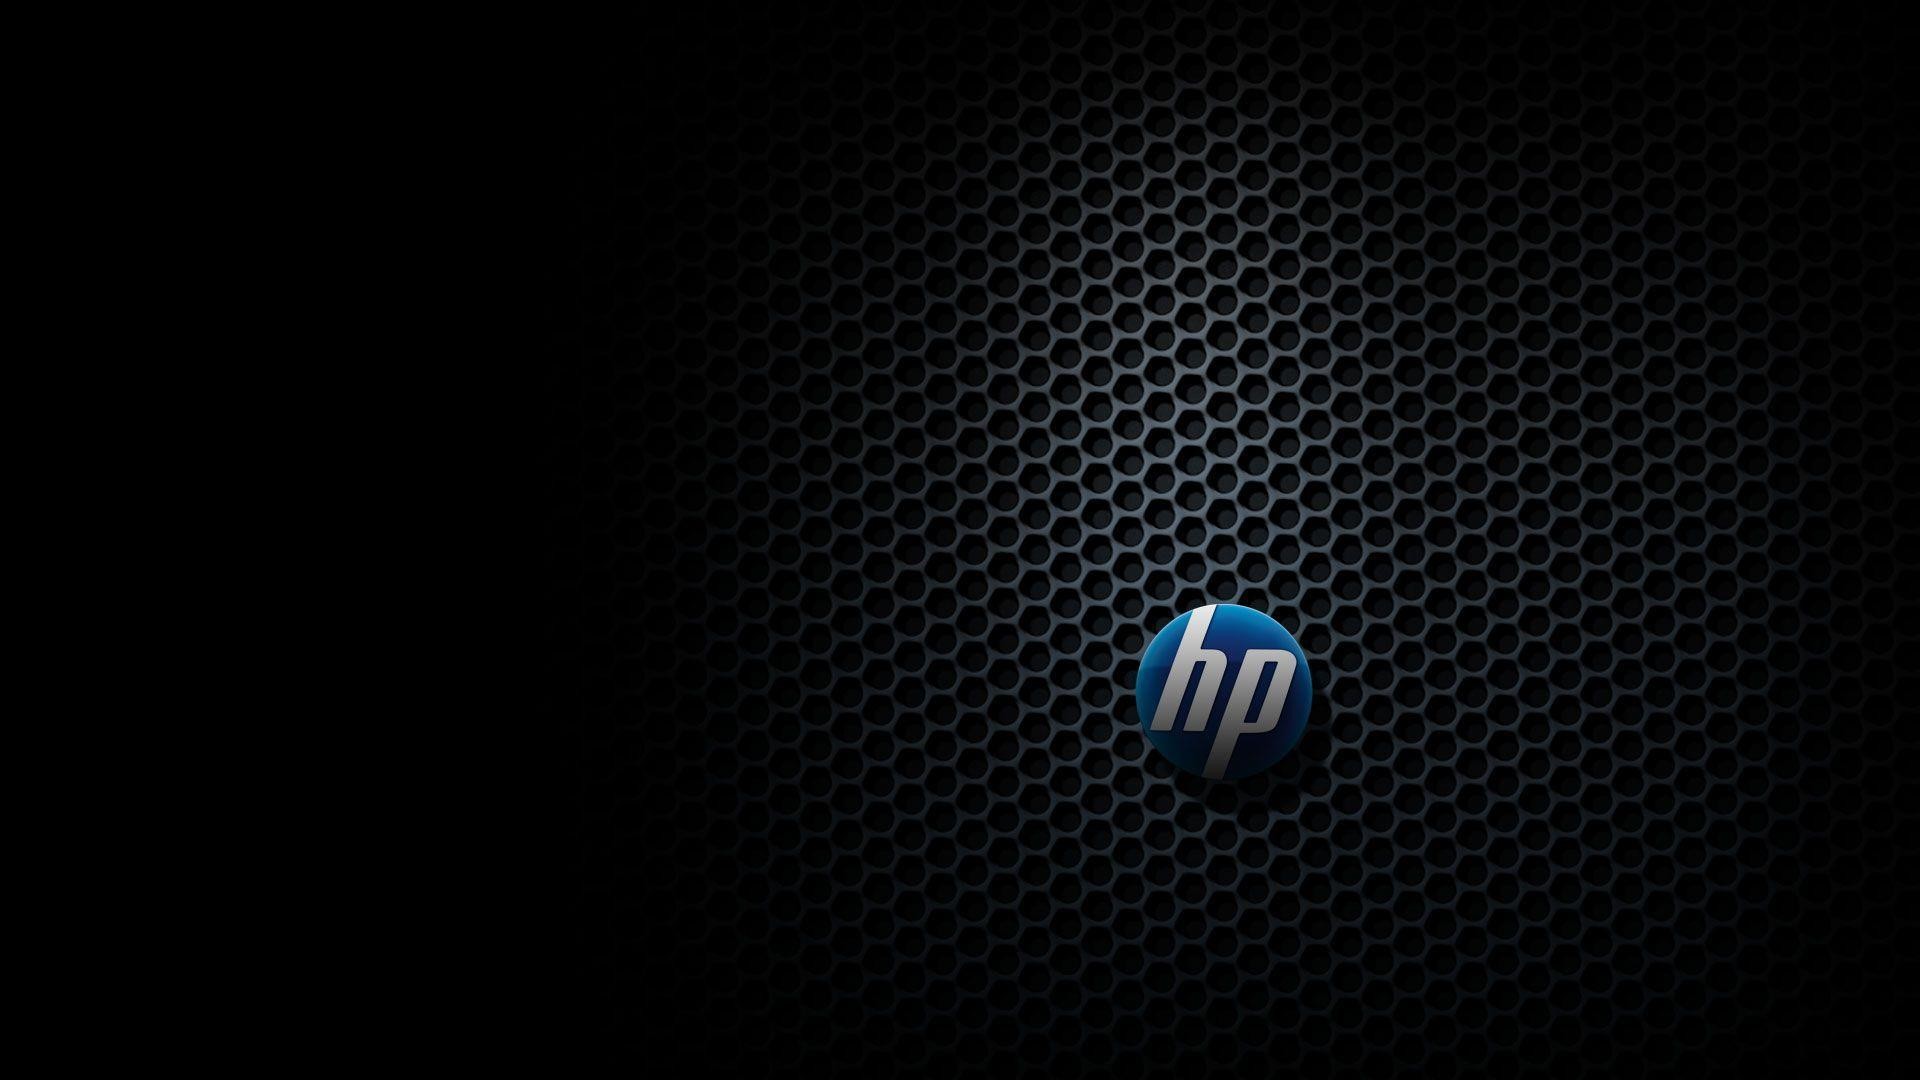 HP Laptop Wallpapers (65+ images)